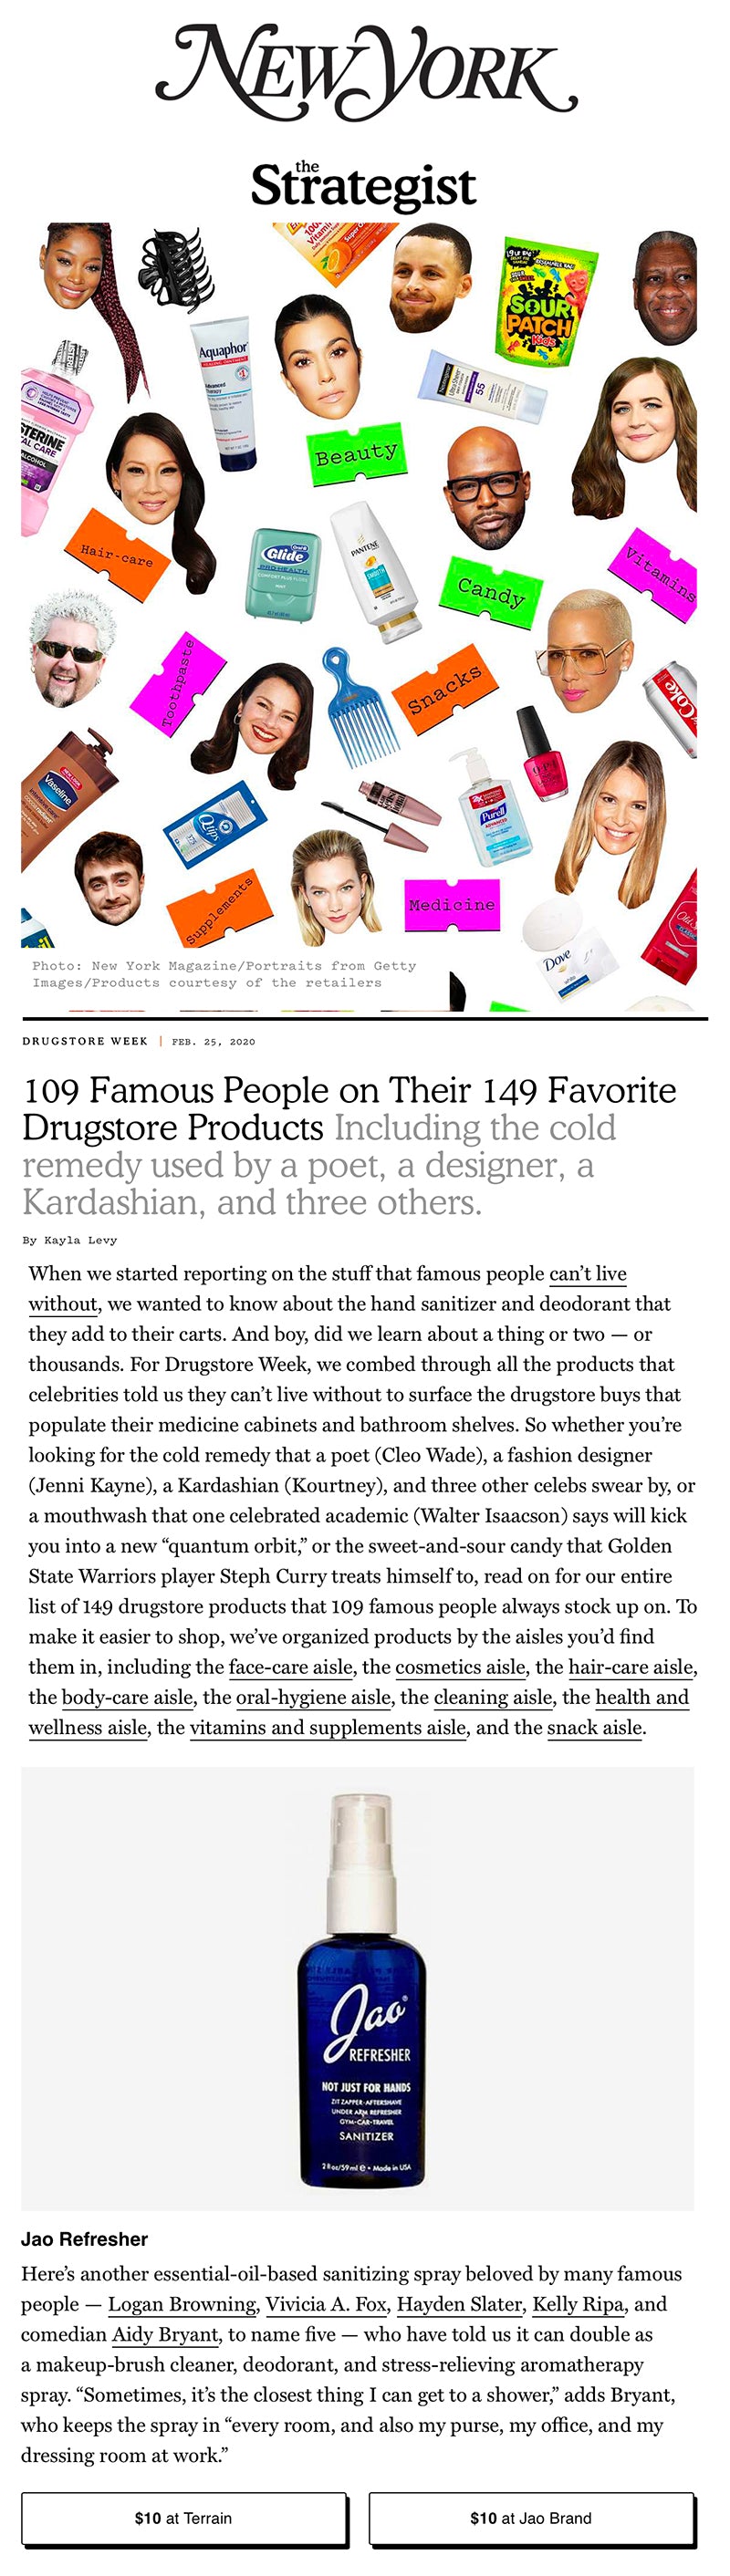 Jao Hand Sanitizer Refresher NY Magazine 109 Famous People on Their 149 Favorite Drugstore Products Share Tweet Pin It +